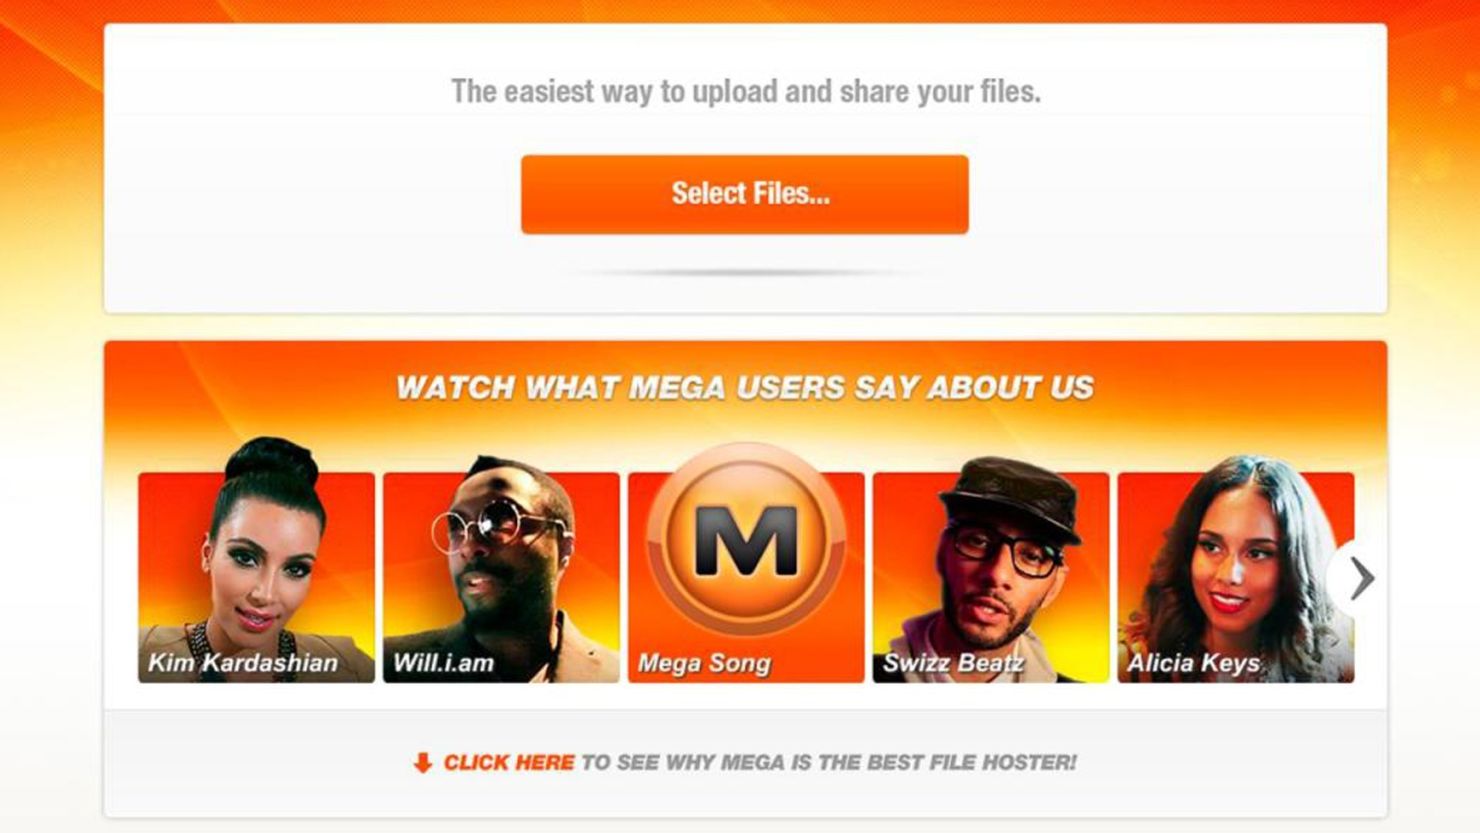 Companies are working to save millions of Megaupload files, which could be deleted, says an attorney for the file-sharing firm.